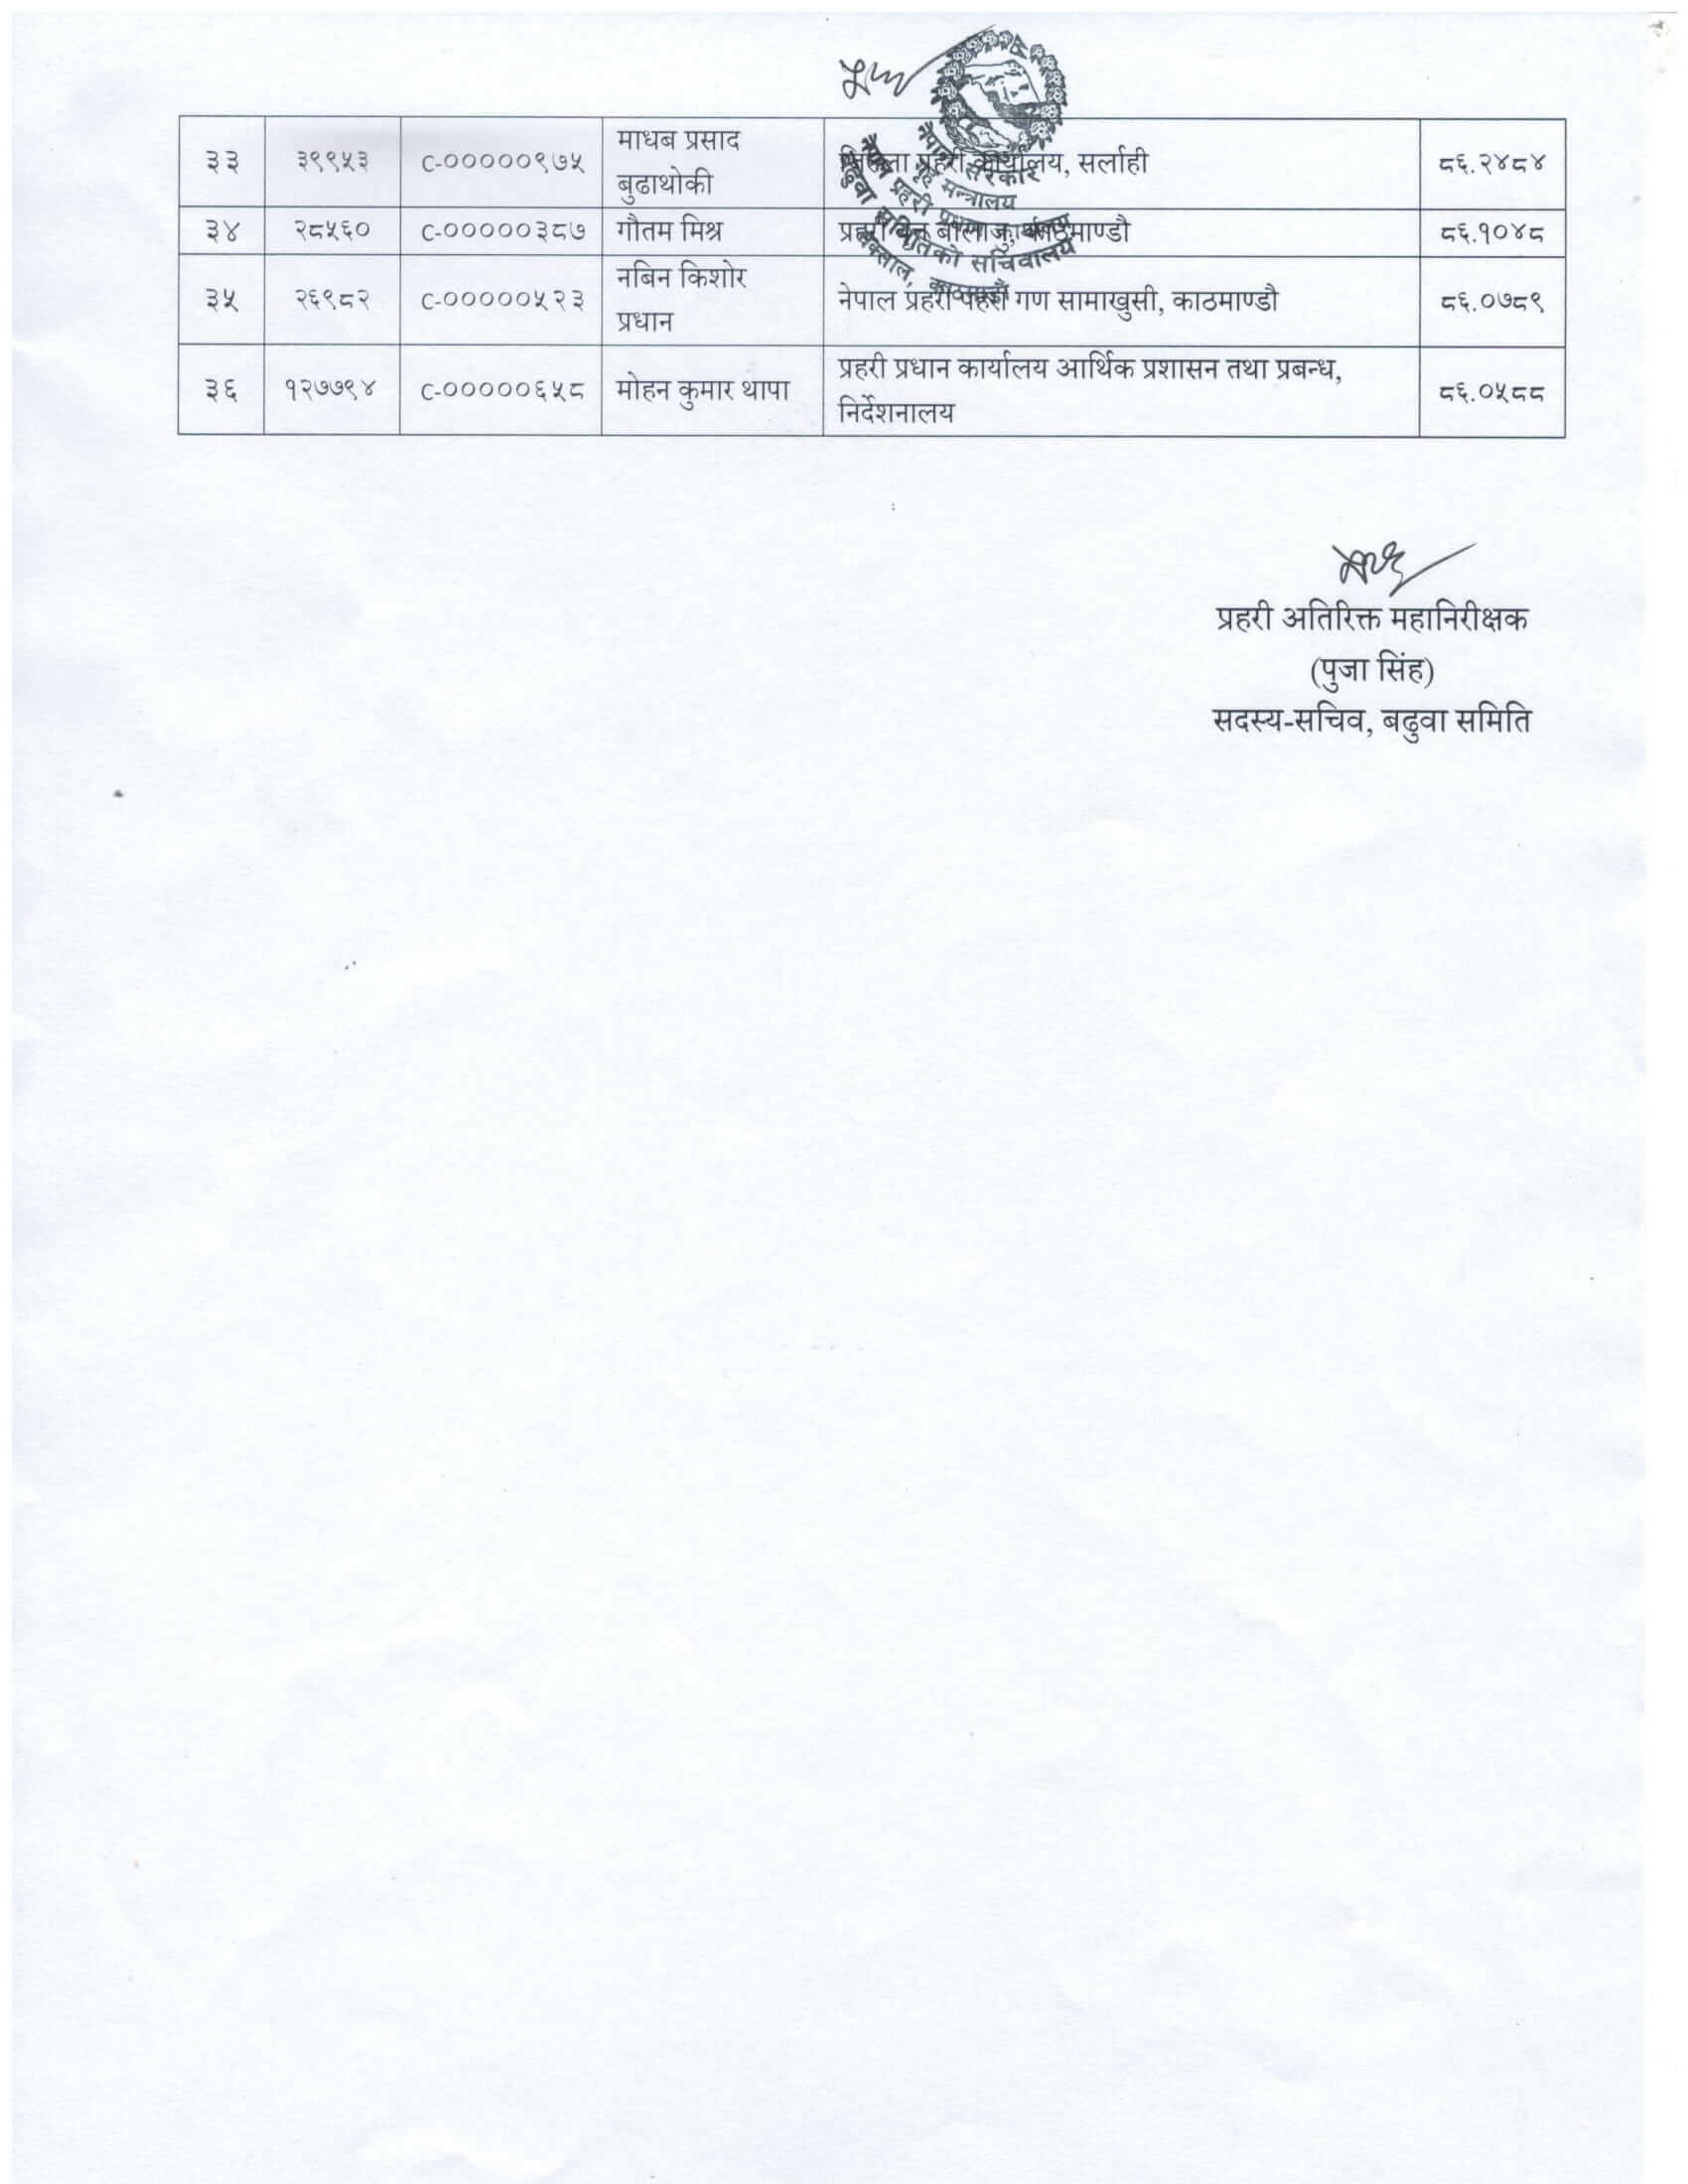 Nepal Police SP Promotion Recommend List (2079-03-29)